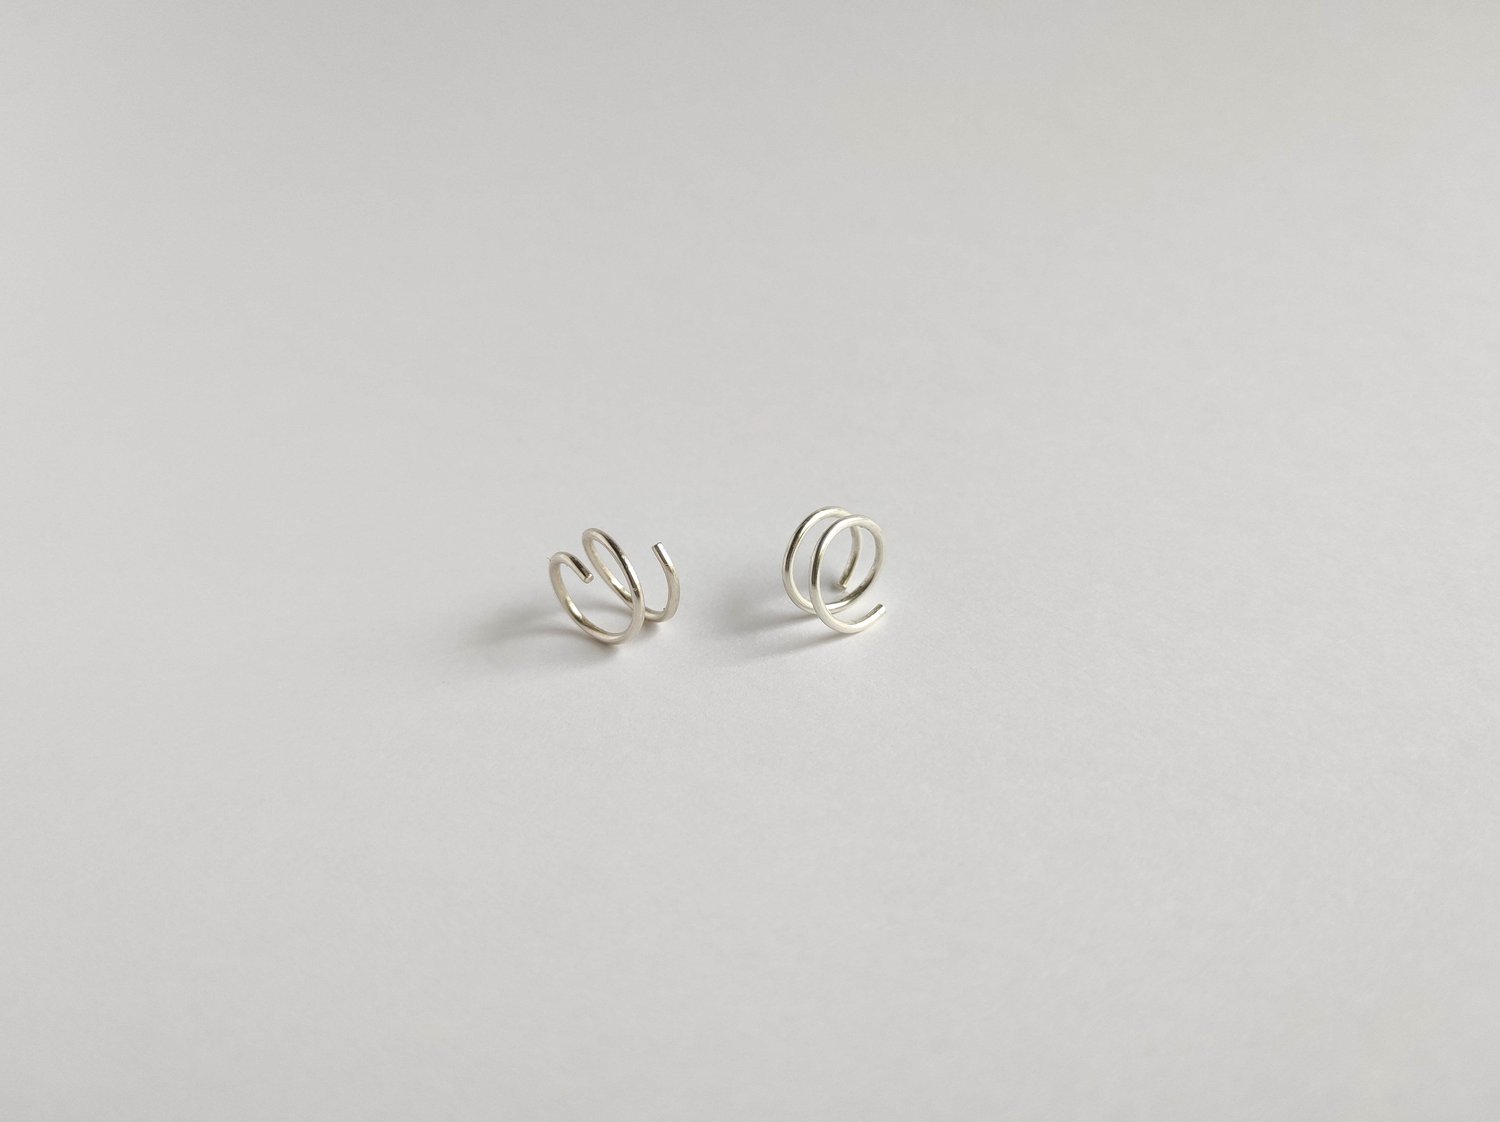 Image of Pair of Open Spiral Silver Earrings